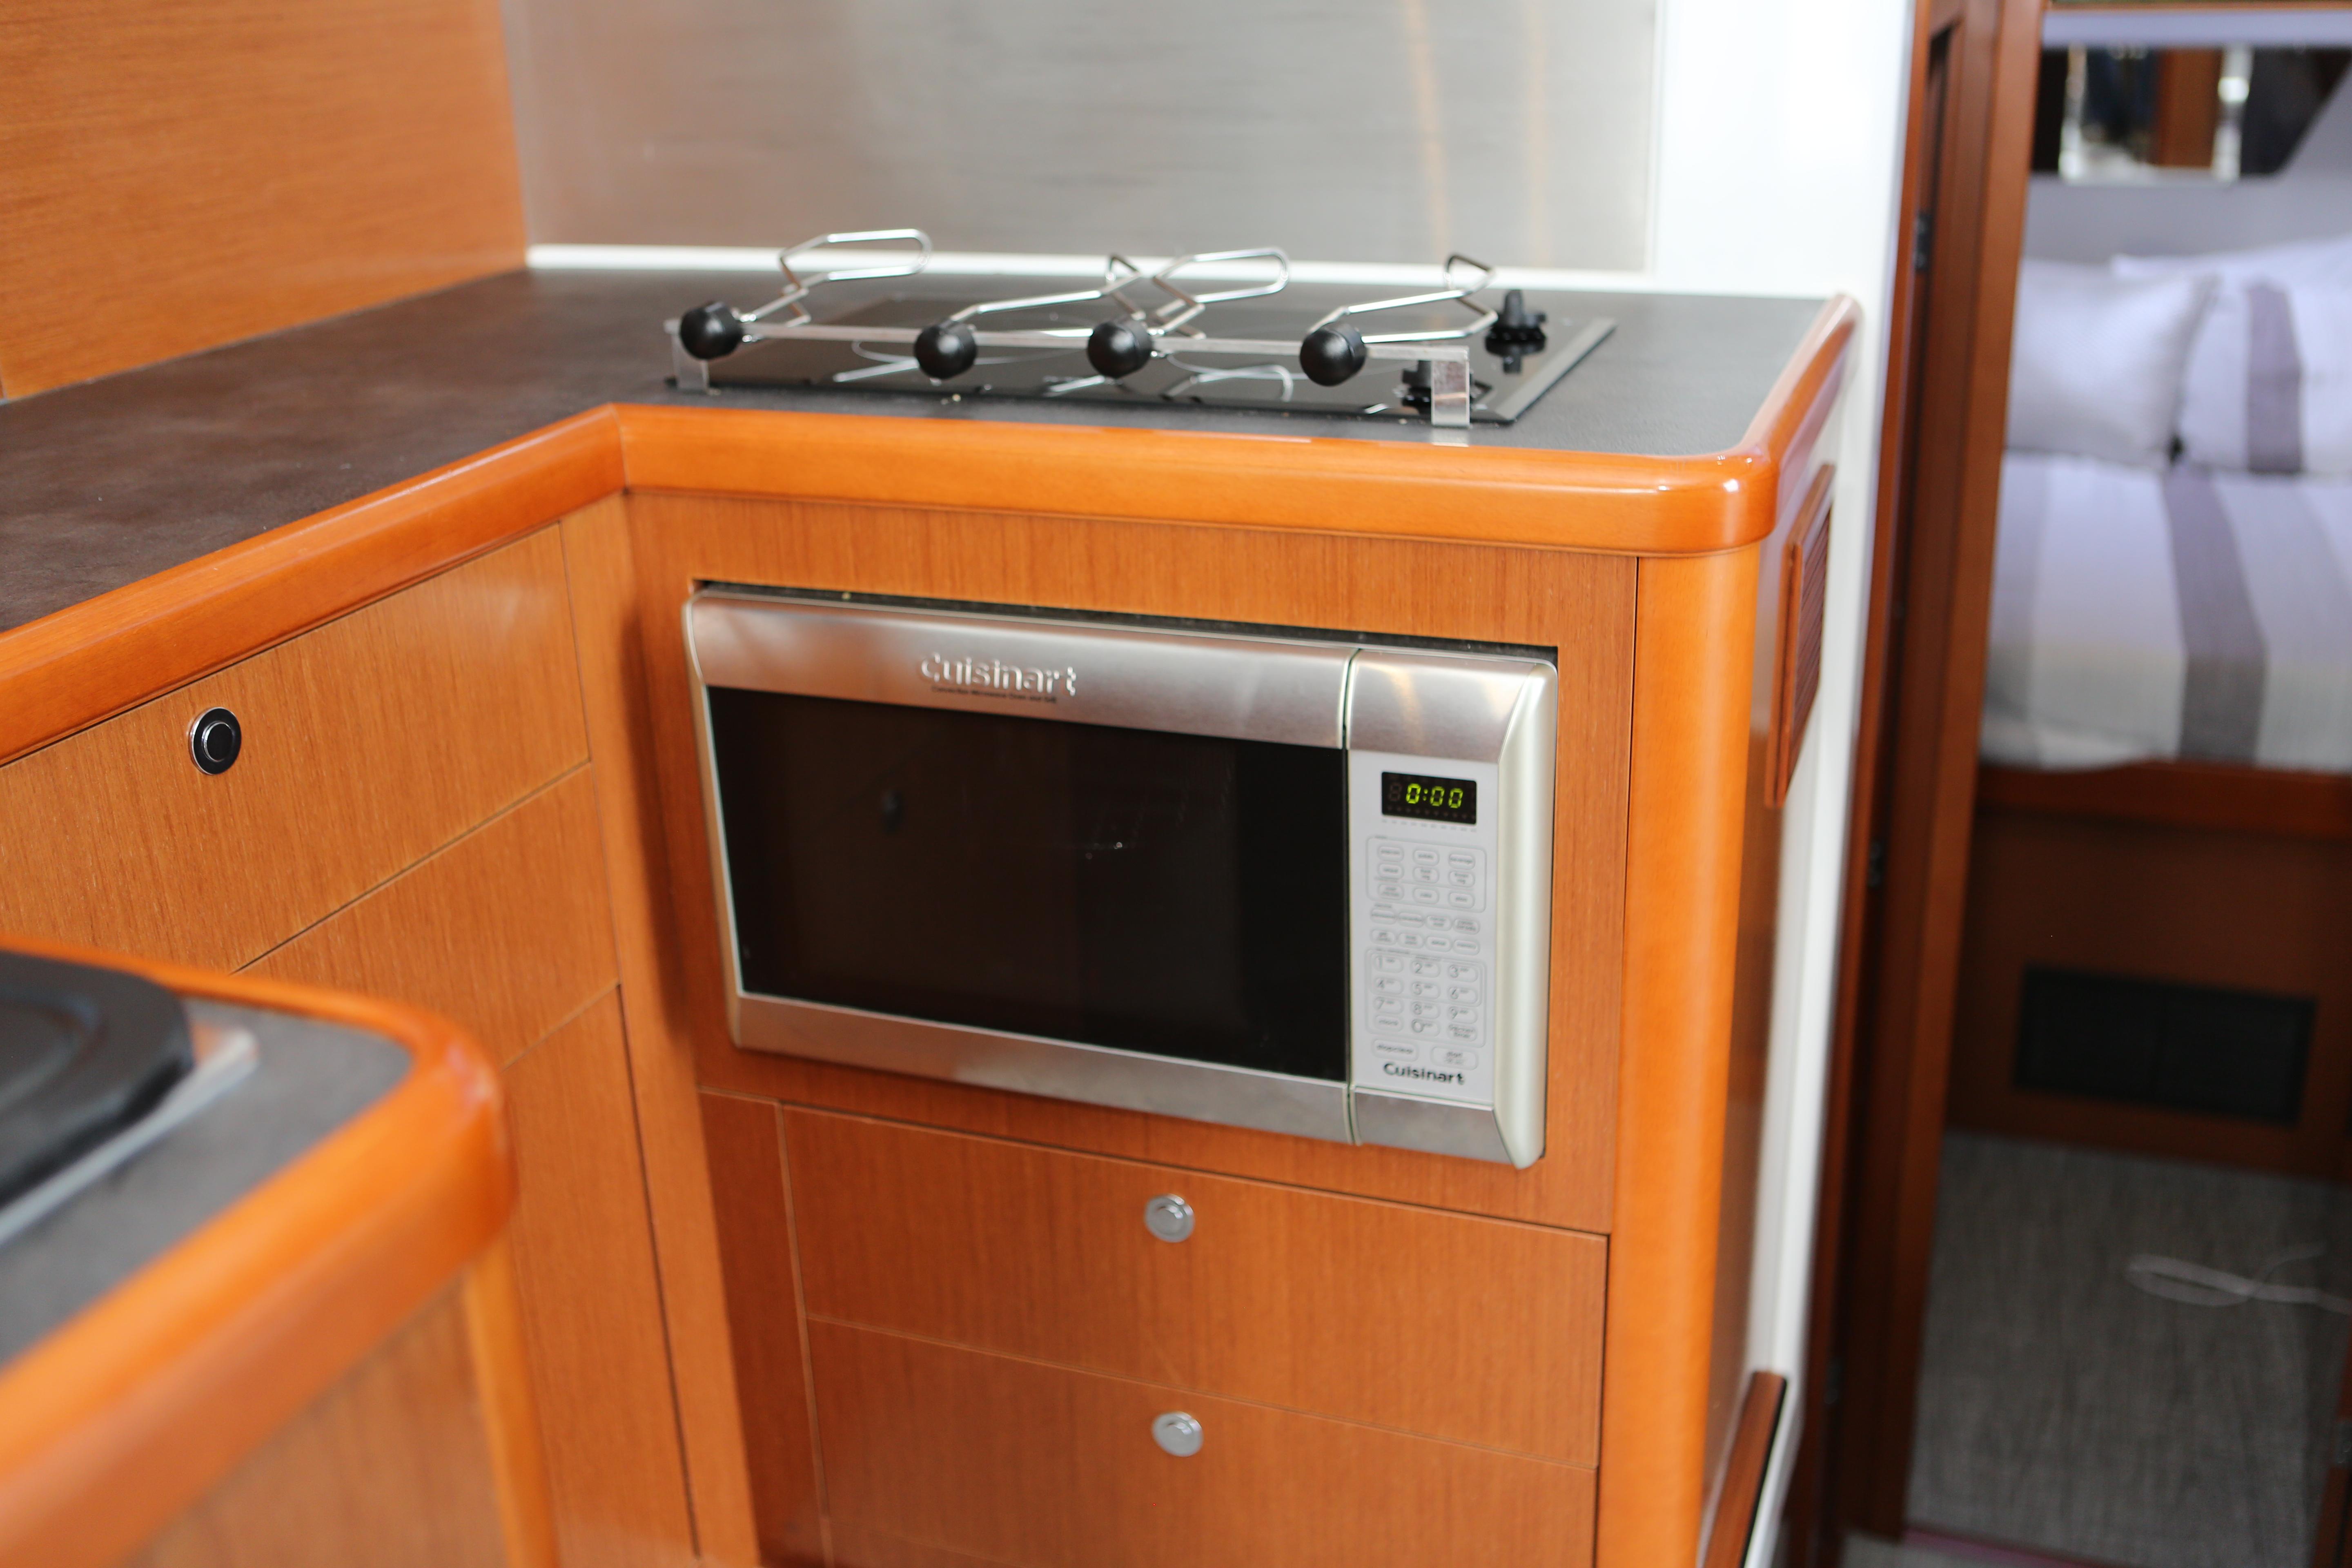 New convection microwave